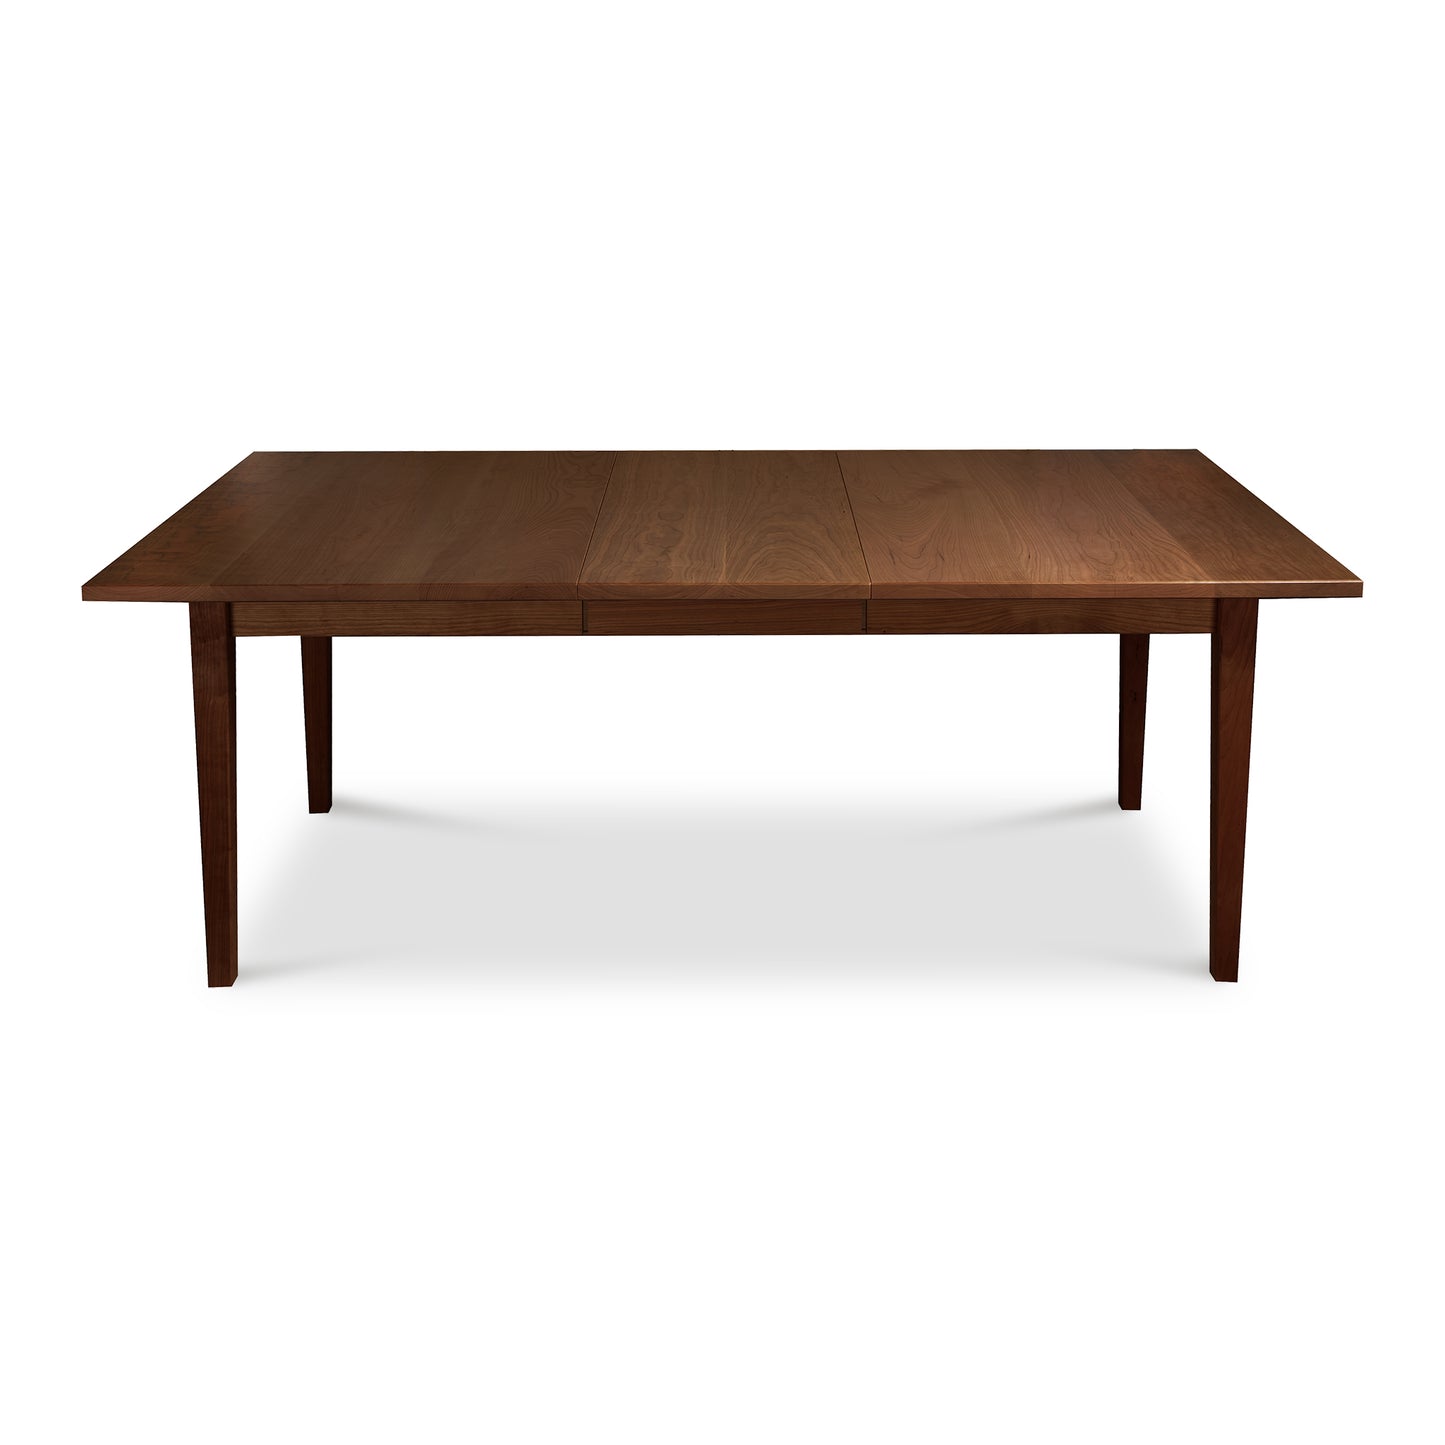 A Vermont Shaker Rectangular Extension Dining Table made by Maple Corner Woodworks, with a smooth finish and extended leaves, set against a plain white background.